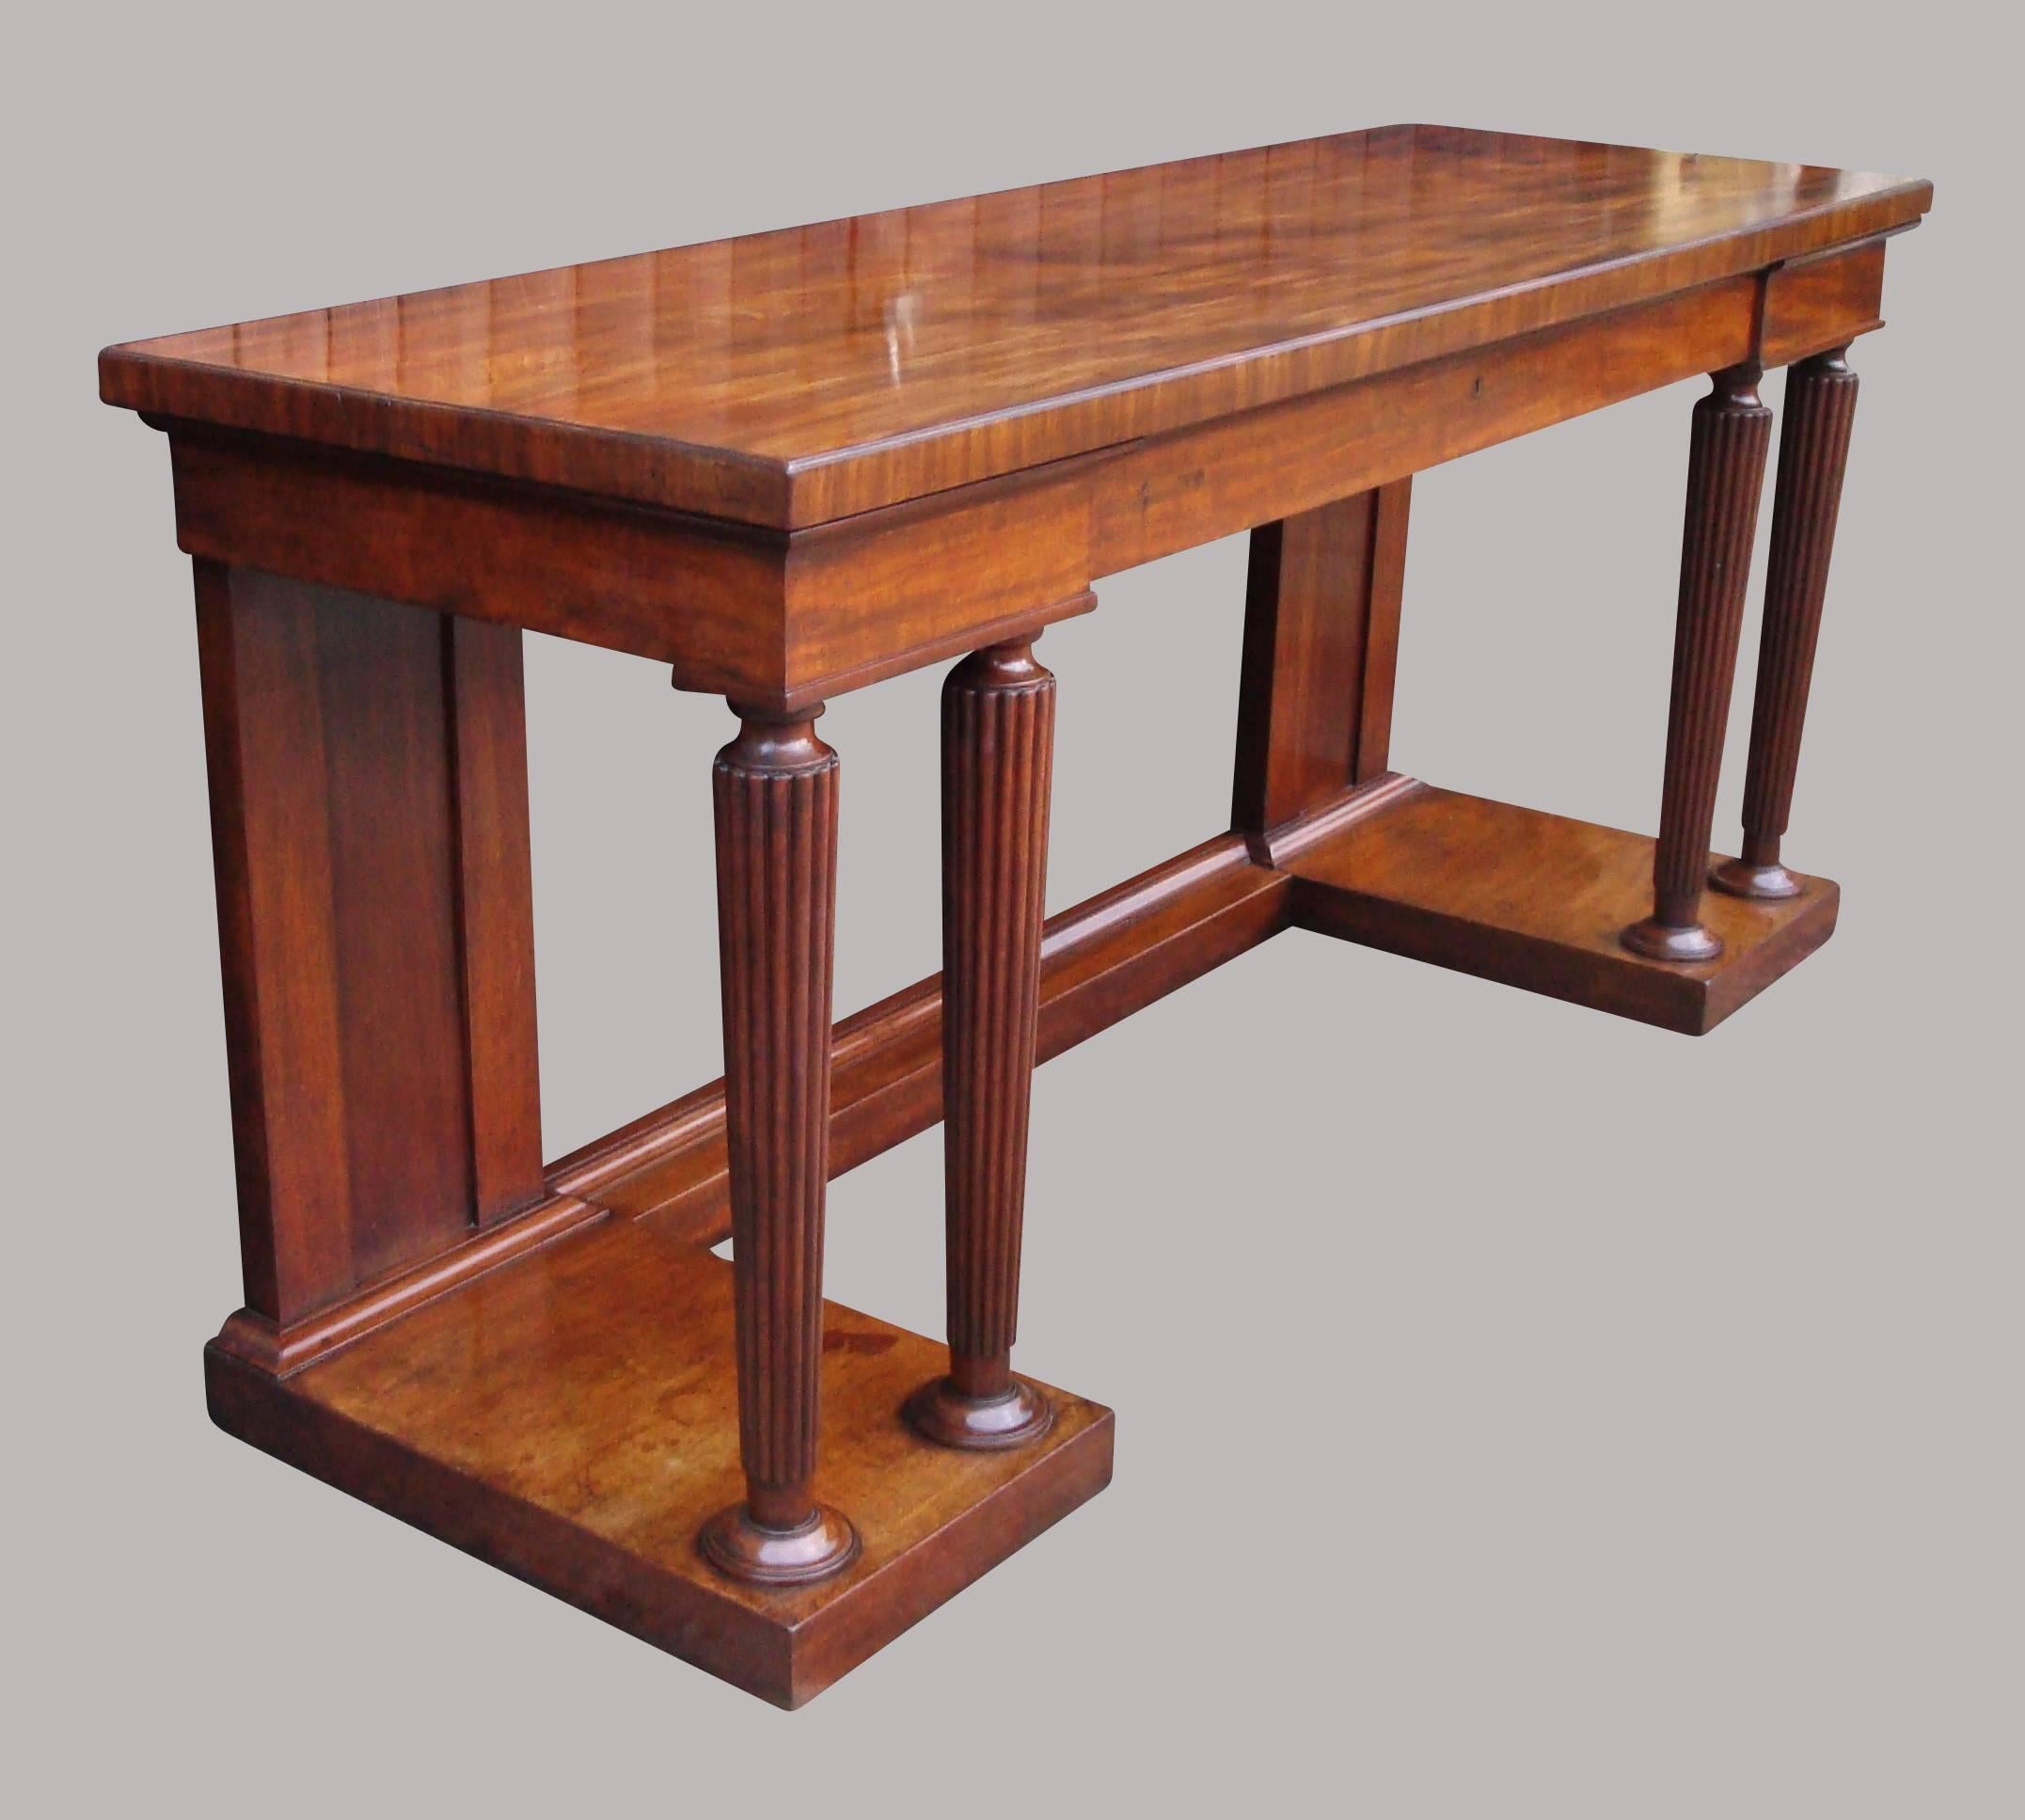 An imposing Regency mahogany neoclassical side table serving table, in the manner of Gillows; the well figured rectangular top with a slender moulding and cross banded edge, above the inverted breakfront frieze incorporating a long central drawer